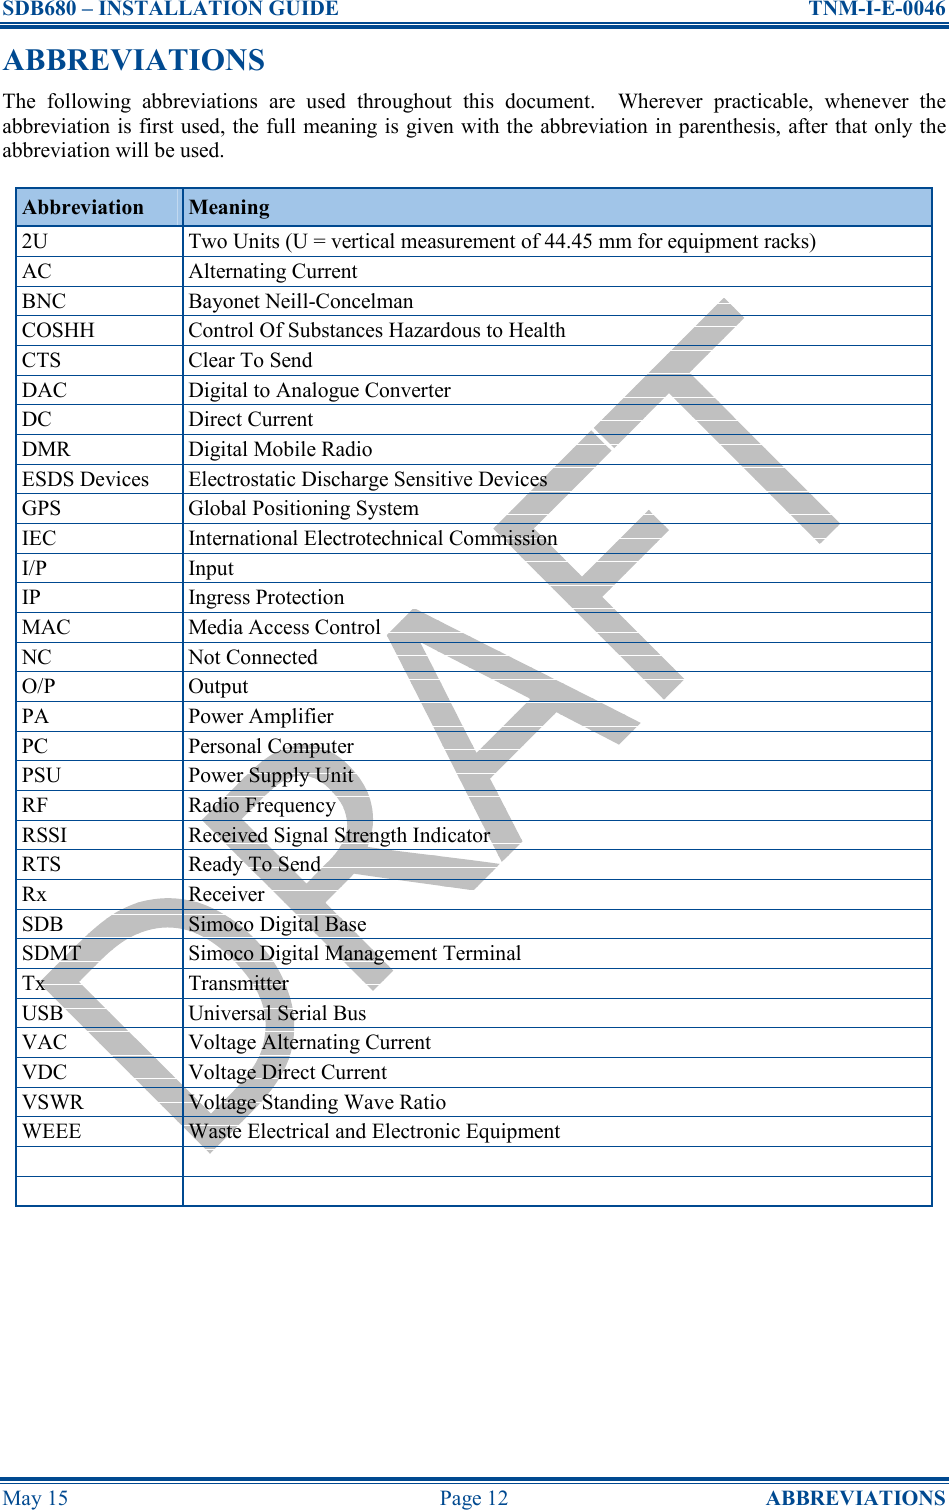 SDB680 – INSTALLATION GUIDE  TNM-I-E-0046 May 15  Page 12  ABBREVIATIONS ABBREVIATIONS The  following  abbreviations  are  used  throughout  this  document.    Wherever  practicable,  whenever  the abbreviation is first used, the full meaning is given with the abbreviation in parenthesis, after that only the abbreviation will be used. Abbreviation  Meaning 2U  Two Units (U = vertical measurement of 44.45 mm for equipment racks) AC  Alternating Current BNC  Bayonet Neill-Concelman COSHH  Control Of Substances Hazardous to Health CTS  Clear To Send DAC  Digital to Analogue Converter DC  Direct Current DMR  Digital Mobile Radio ESDS Devices  Electrostatic Discharge Sensitive Devices GPS  Global Positioning System IEC  International Electrotechnical Commission I/P  Input IP  Ingress Protection MAC  Media Access Control NC  Not Connected O/P  Output PA  Power Amplifier PC  Personal Computer PSU  Power Supply Unit RF  Radio Frequency RSSI  Received Signal Strength Indicator RTS  Ready To Send Rx  Receiver SDB  Simoco Digital Base SDMT  Simoco Digital Management Terminal Tx  Transmitter USB  Universal Serial Bus VAC  Voltage Alternating Current VDC  Voltage Direct Current VSWR  Voltage Standing Wave Ratio WEEE  Waste Electrical and Electronic Equipment          